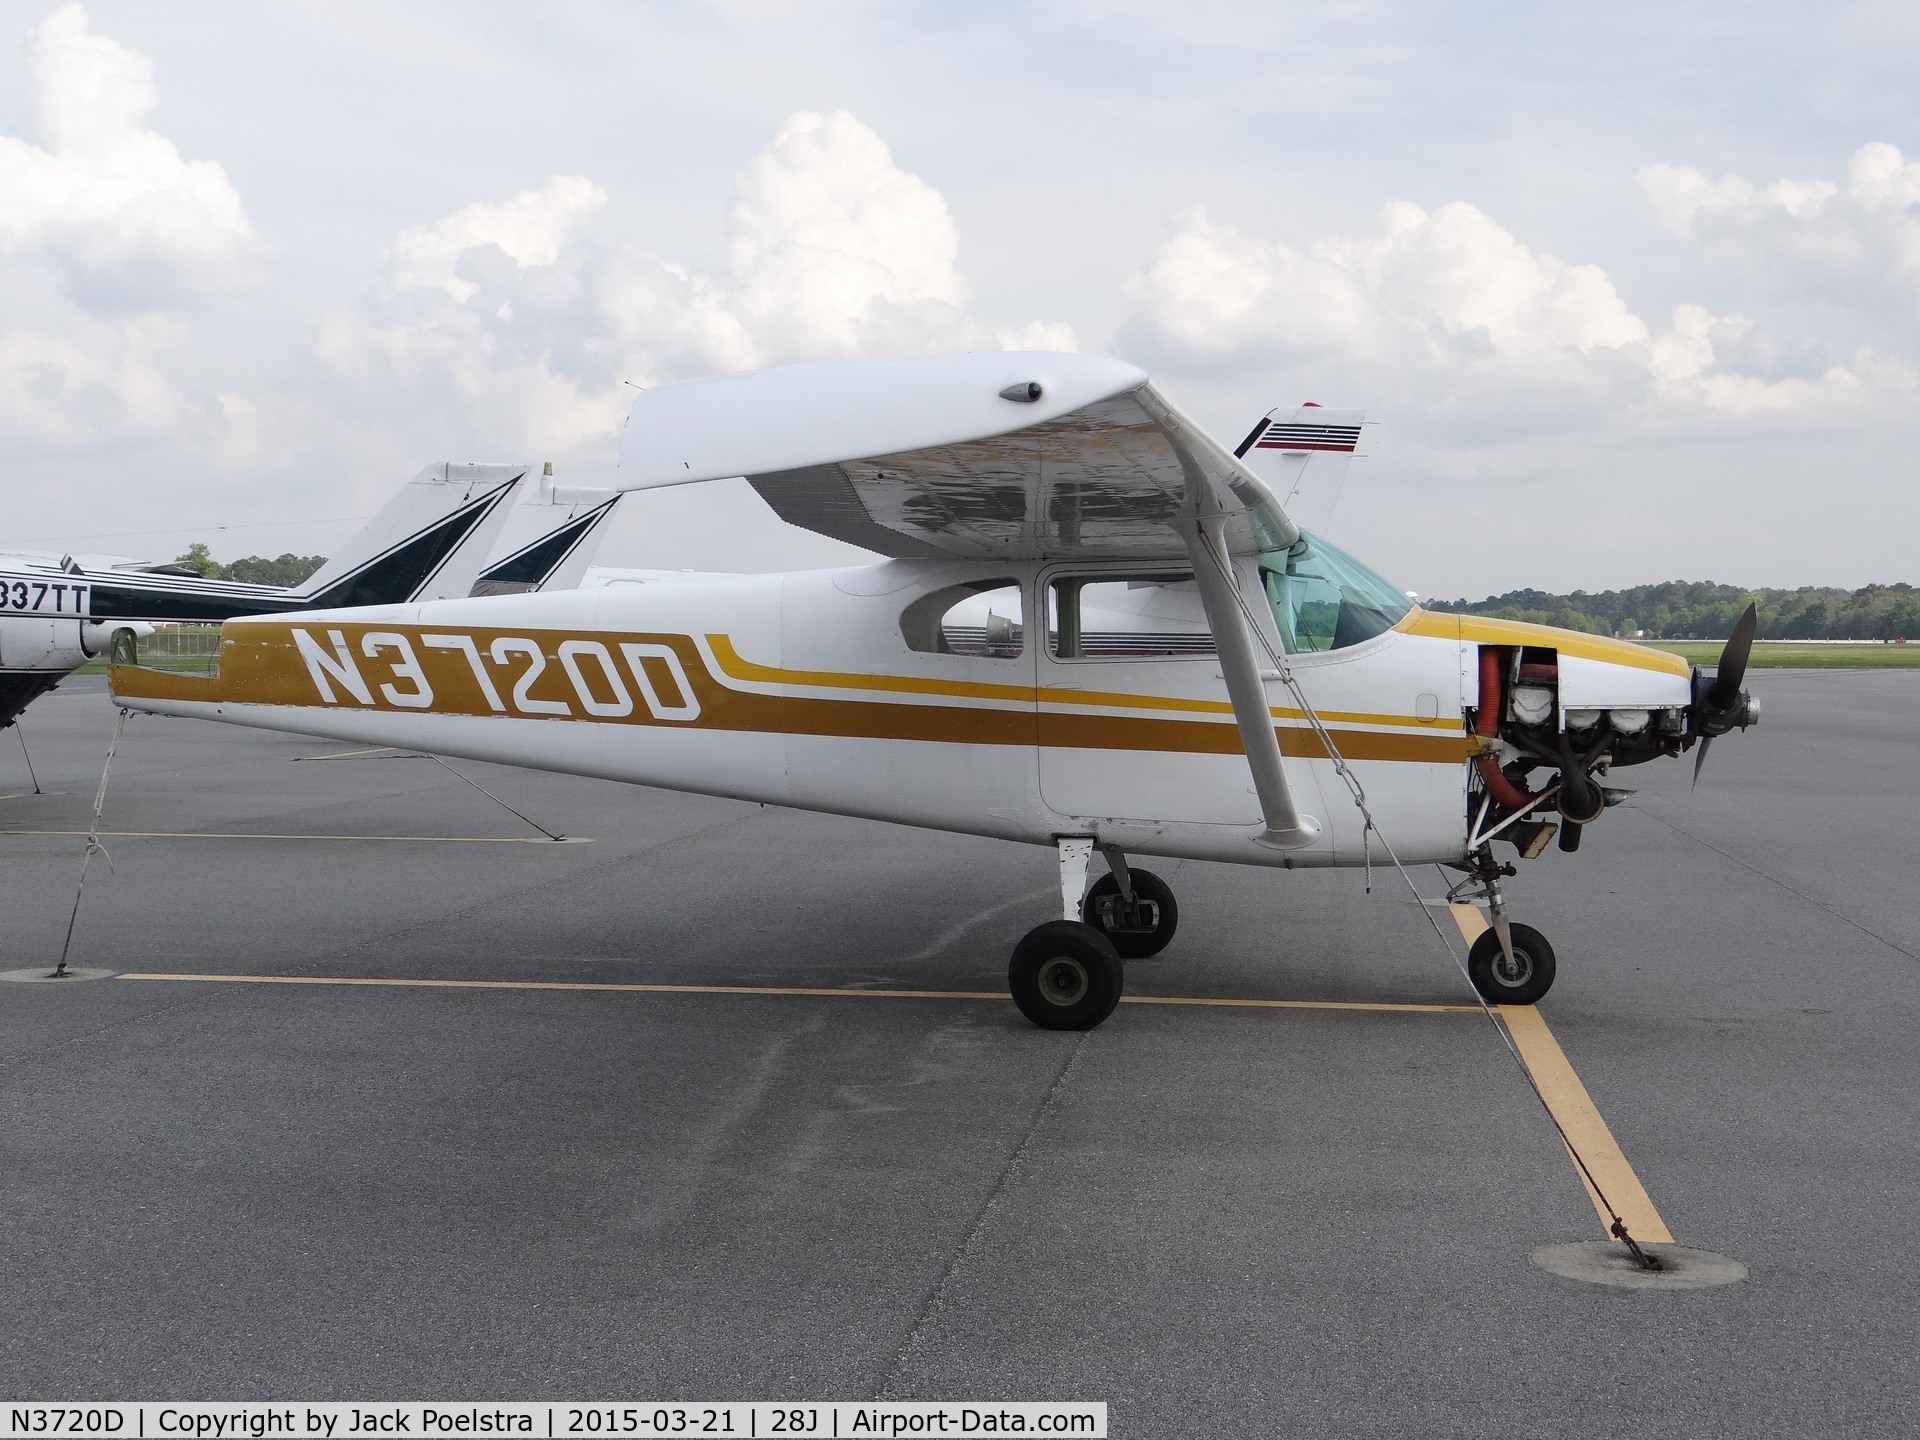 N3720D, 1957 Cessna 182A Skylane C/N 34420, C.182A, missing some parts, at ramp of Palatka